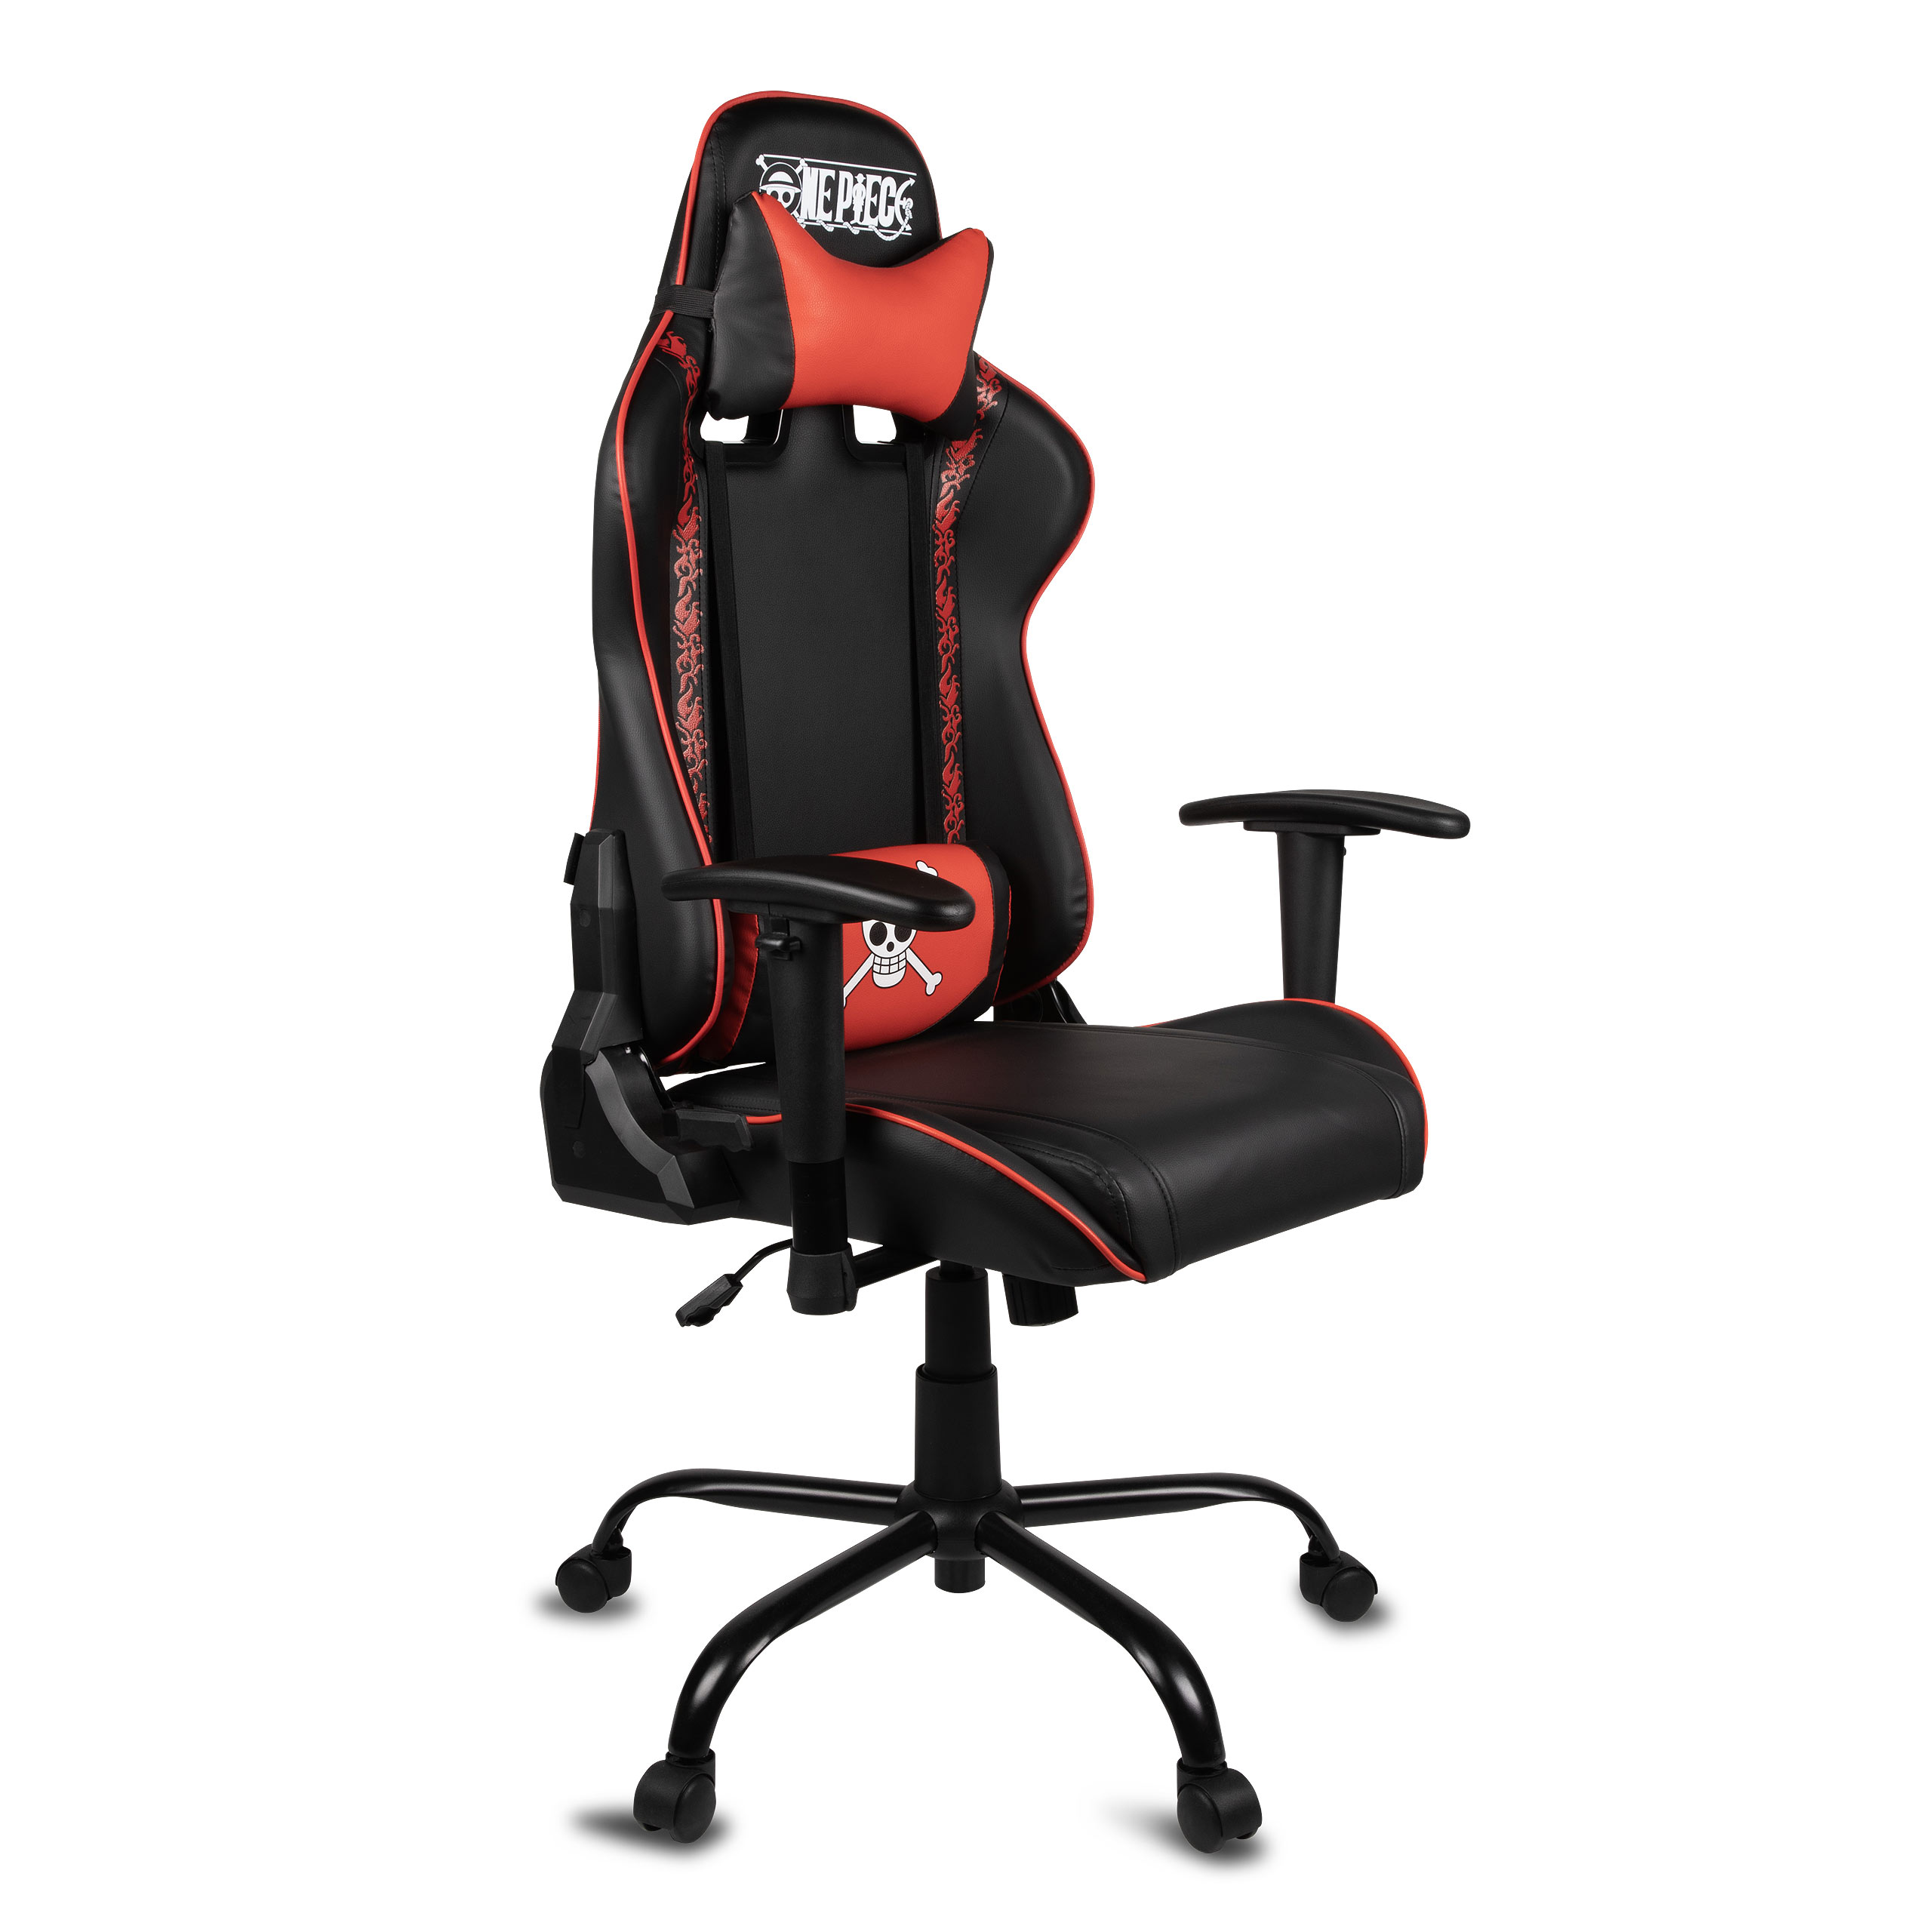 One Piece - Skull Gaming Chair